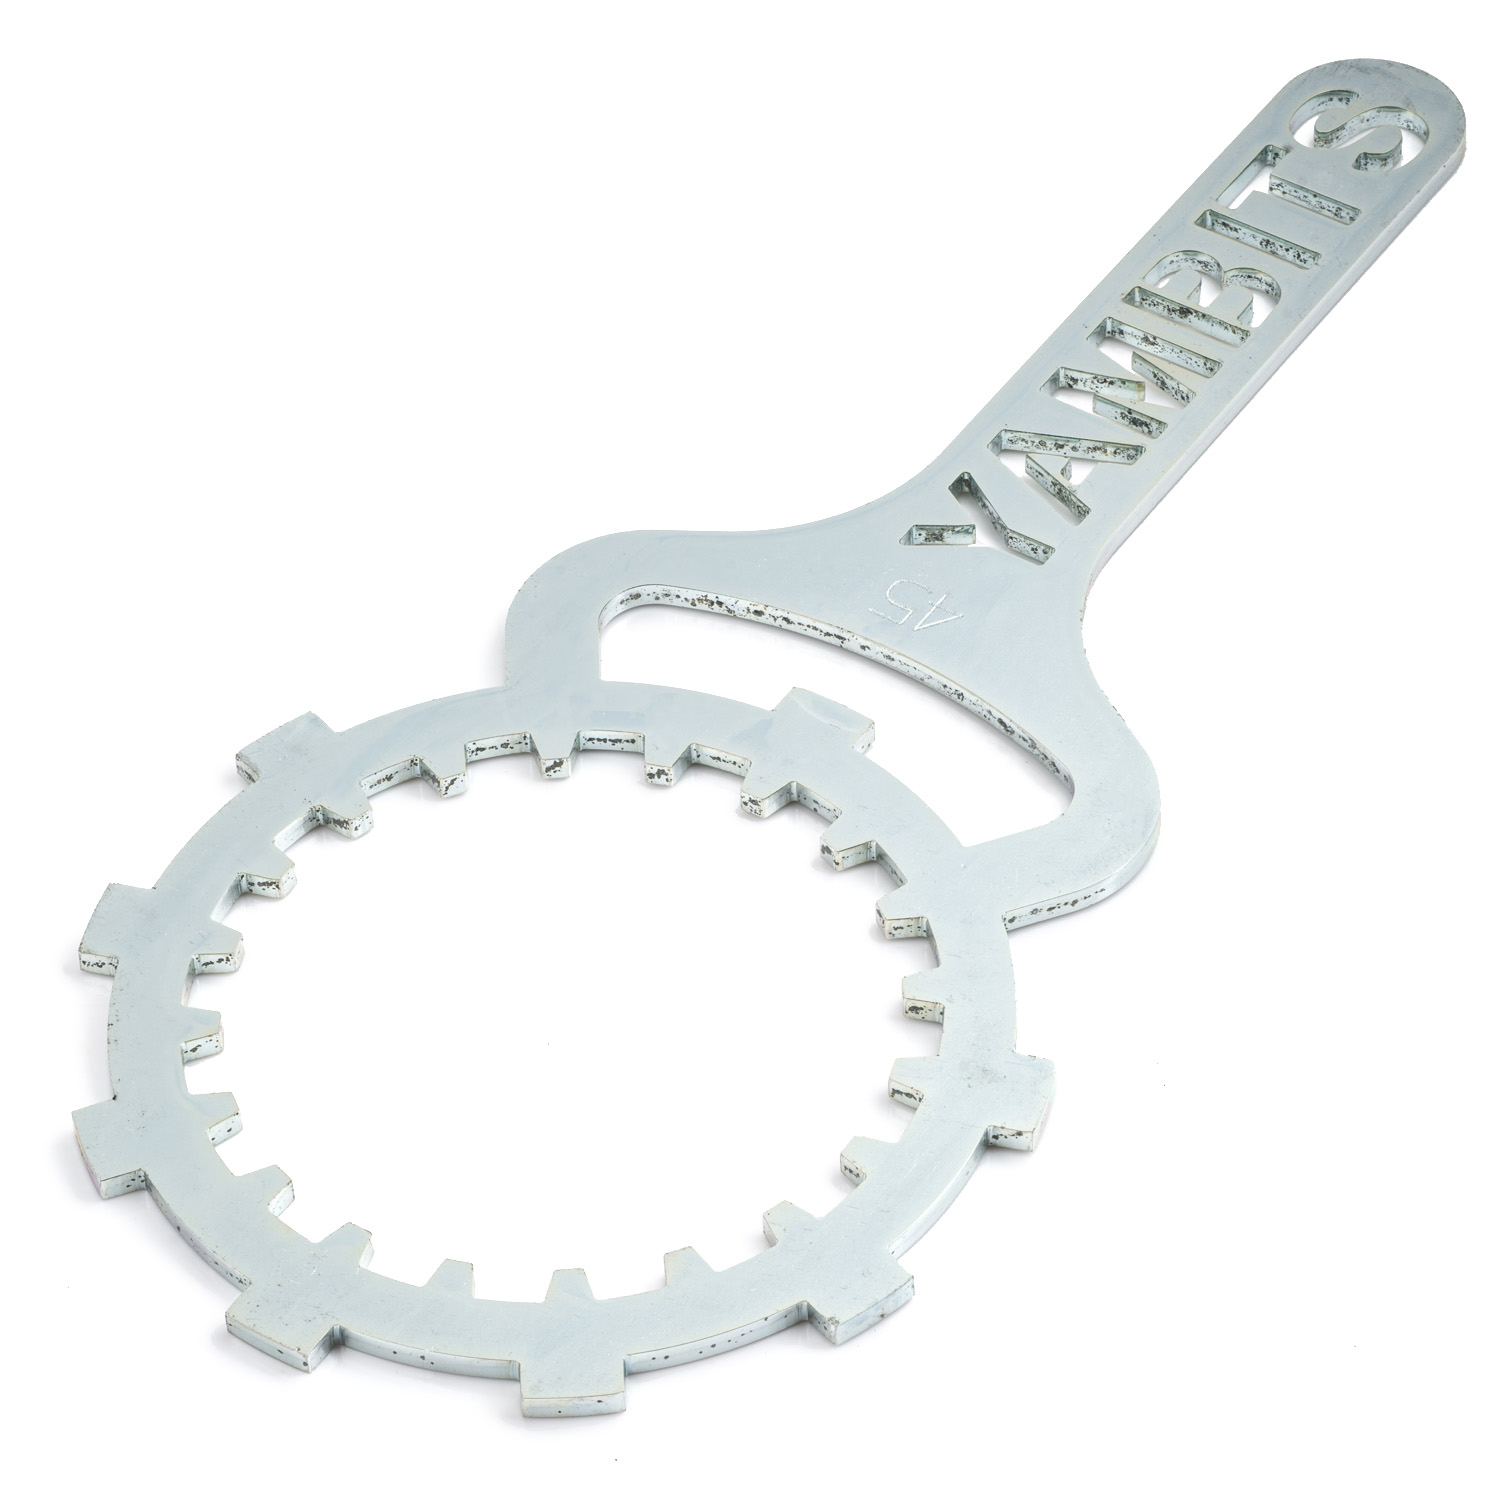 AS3 Clutch Holding Tool